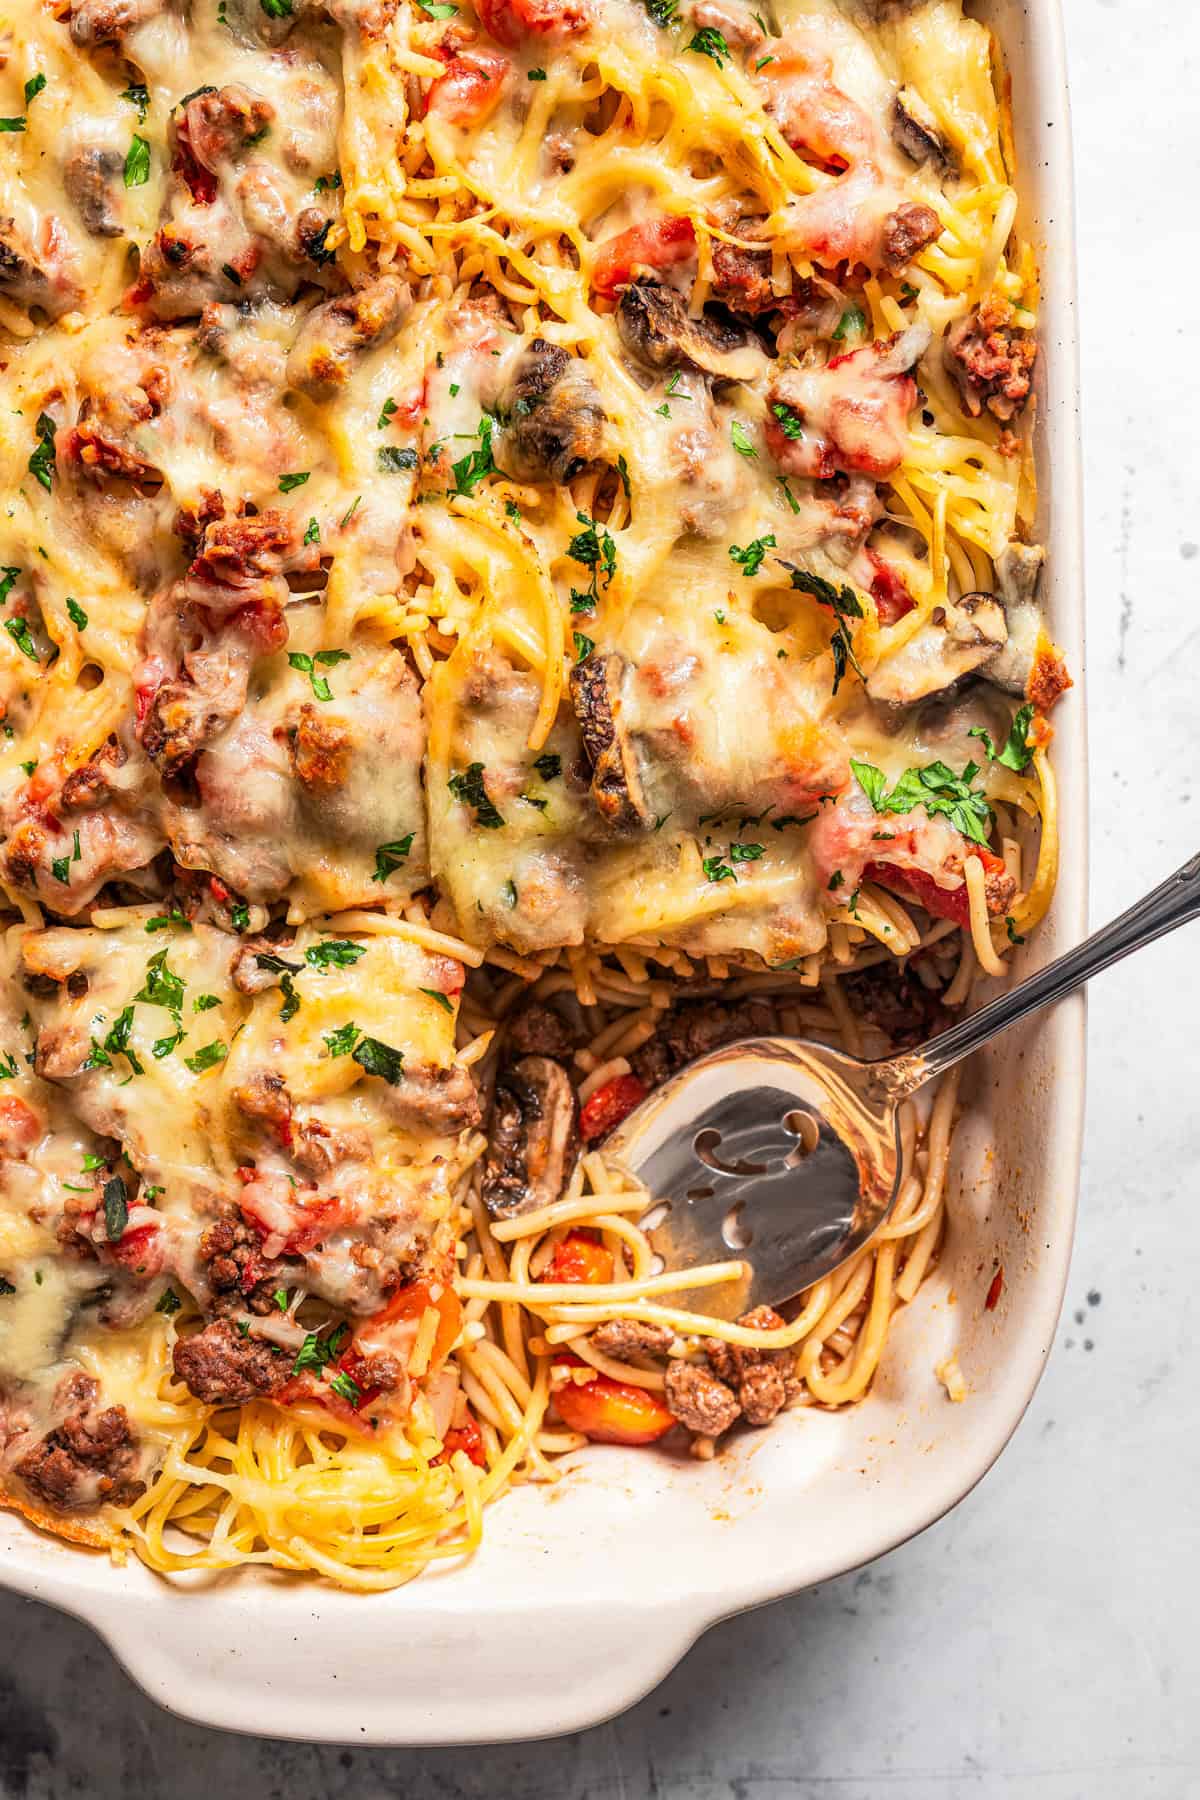 Pasta casserole in a baking dish, with a serving missing from the corner.